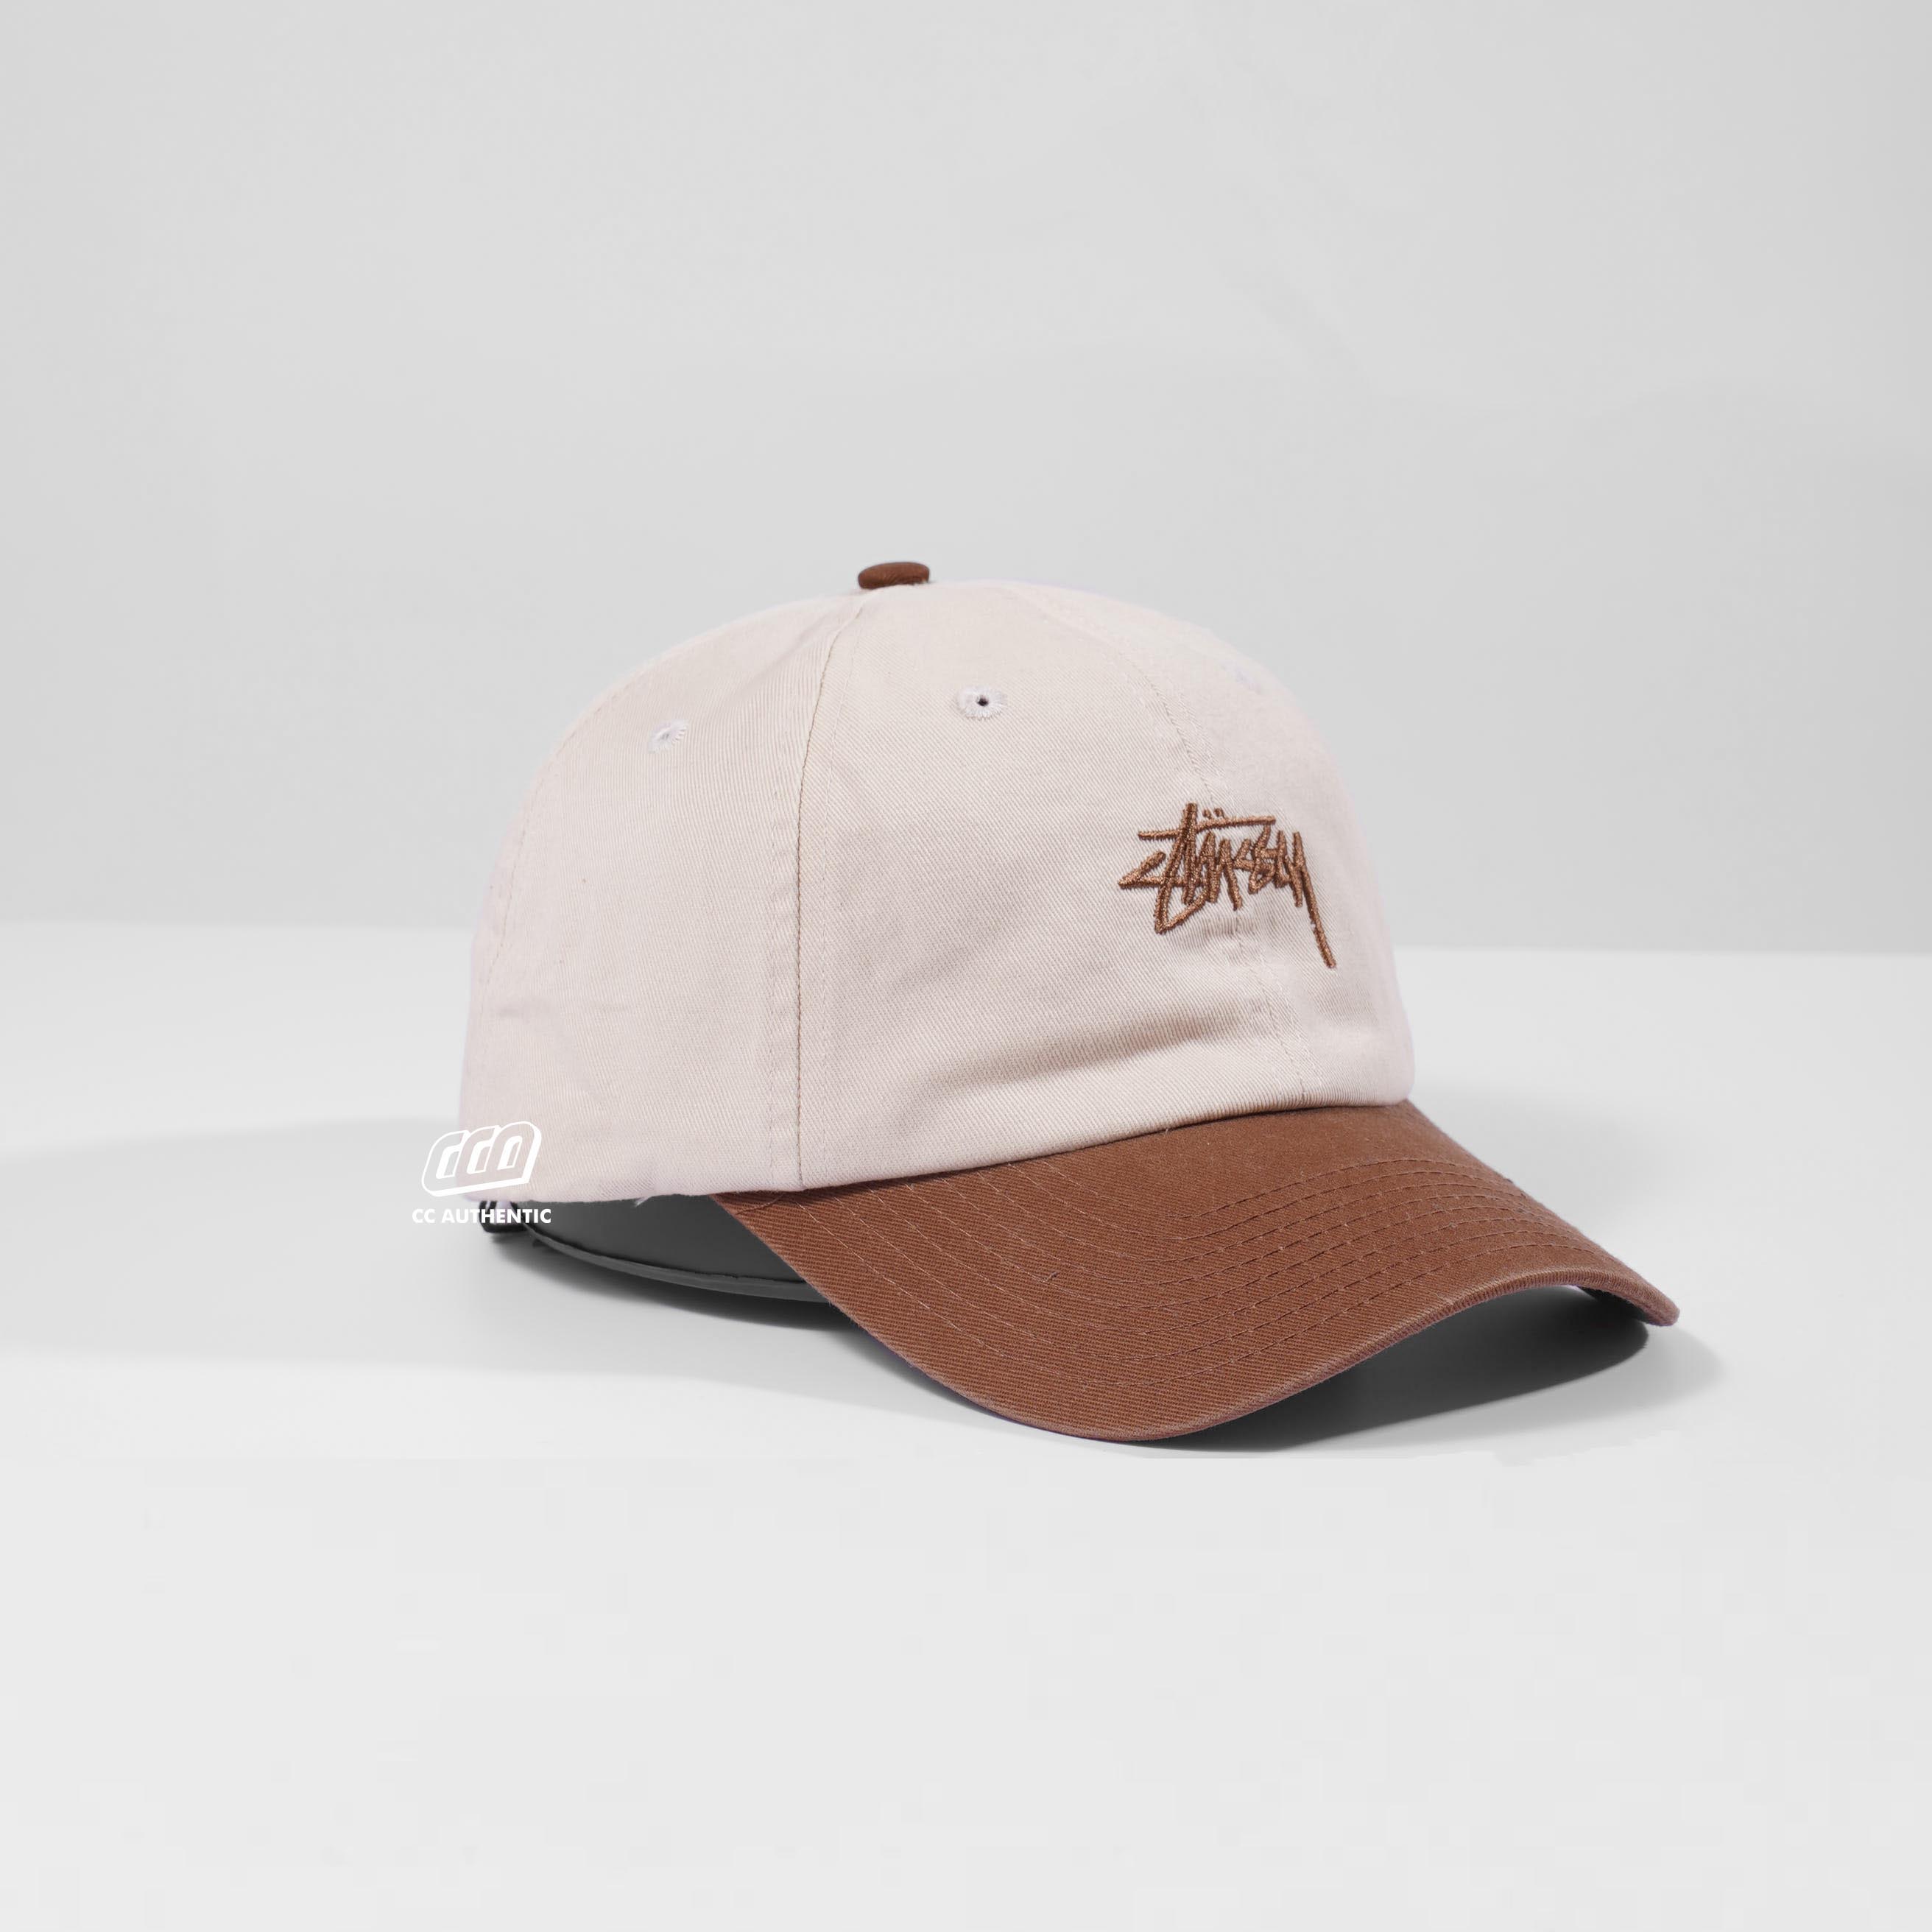 stussy stock low pro cap - NATURAL CHOCOLATE